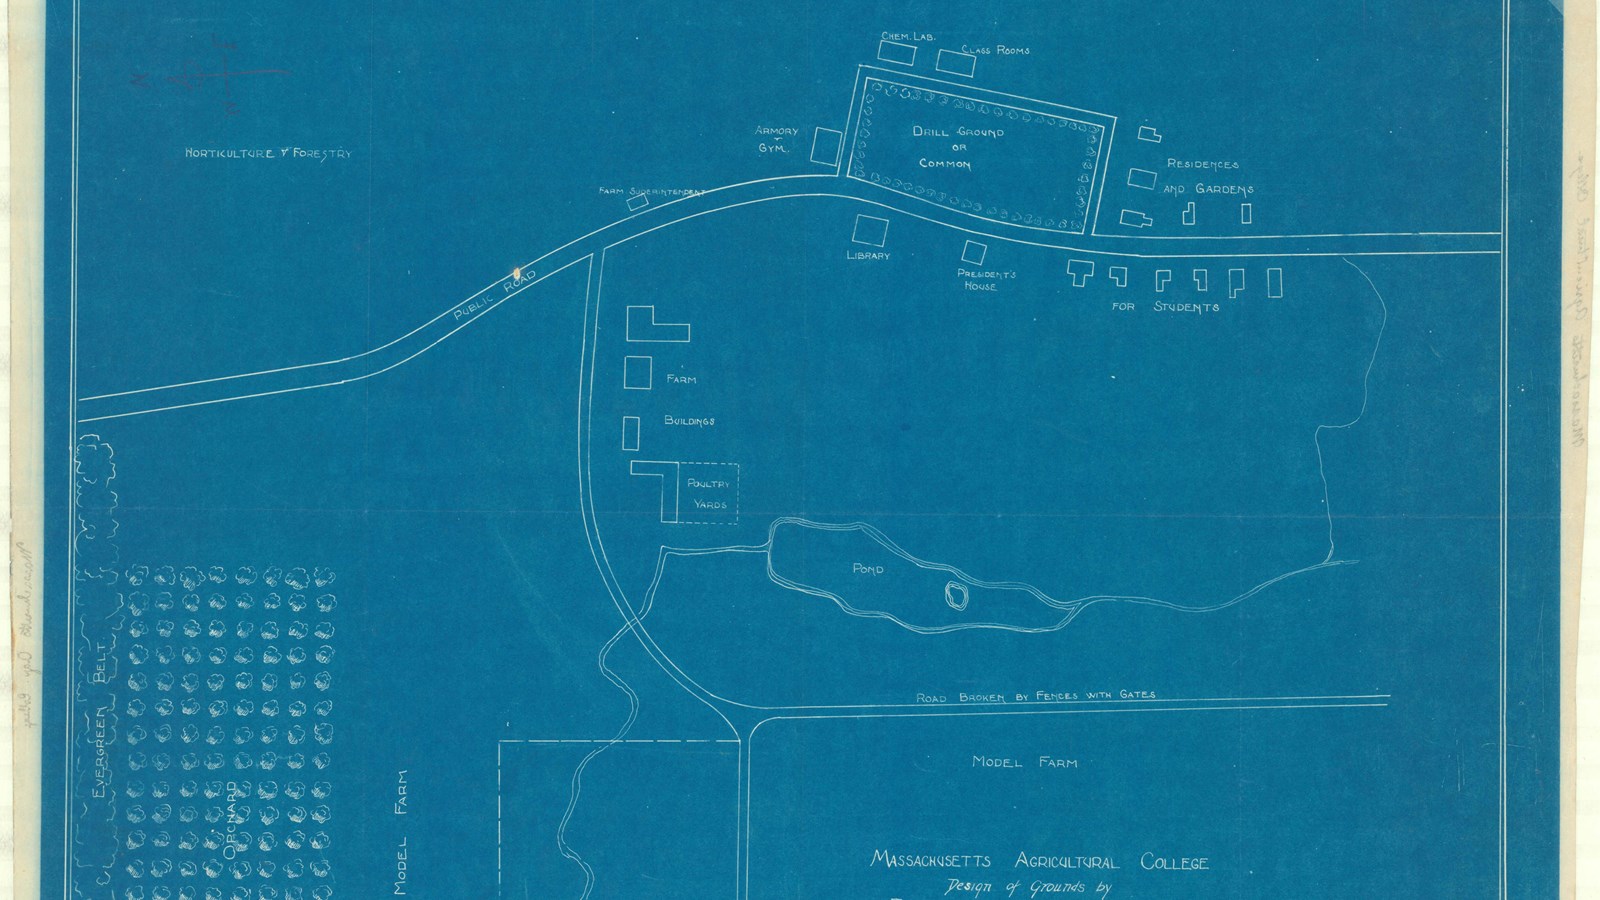 Blueprint of two roads with buildings on side, a pond, a pasture and orchard